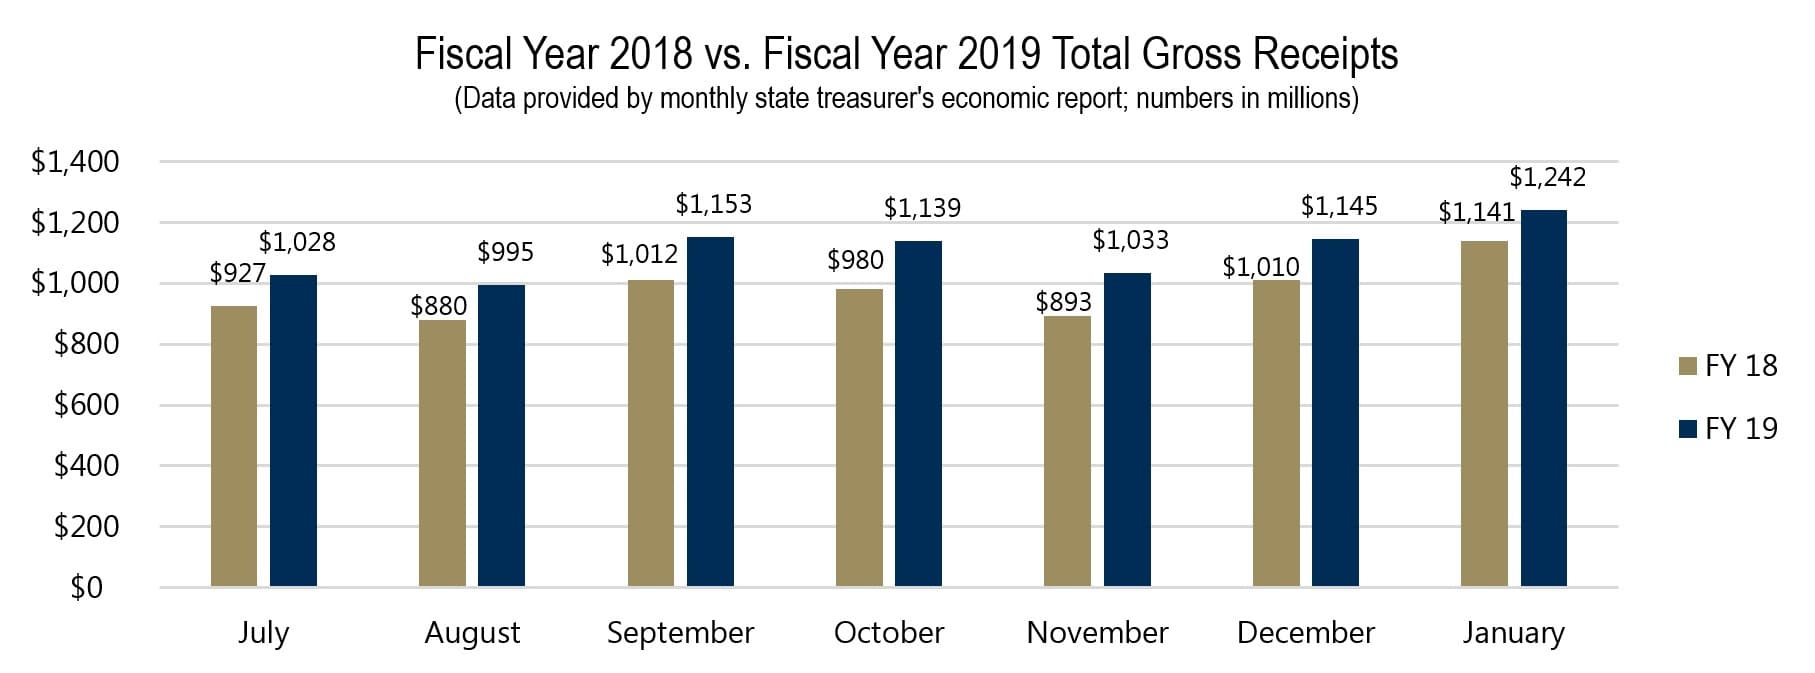 Fiscal Year 2018 vs. Fiscal Year 2019 Total Gross Receipts